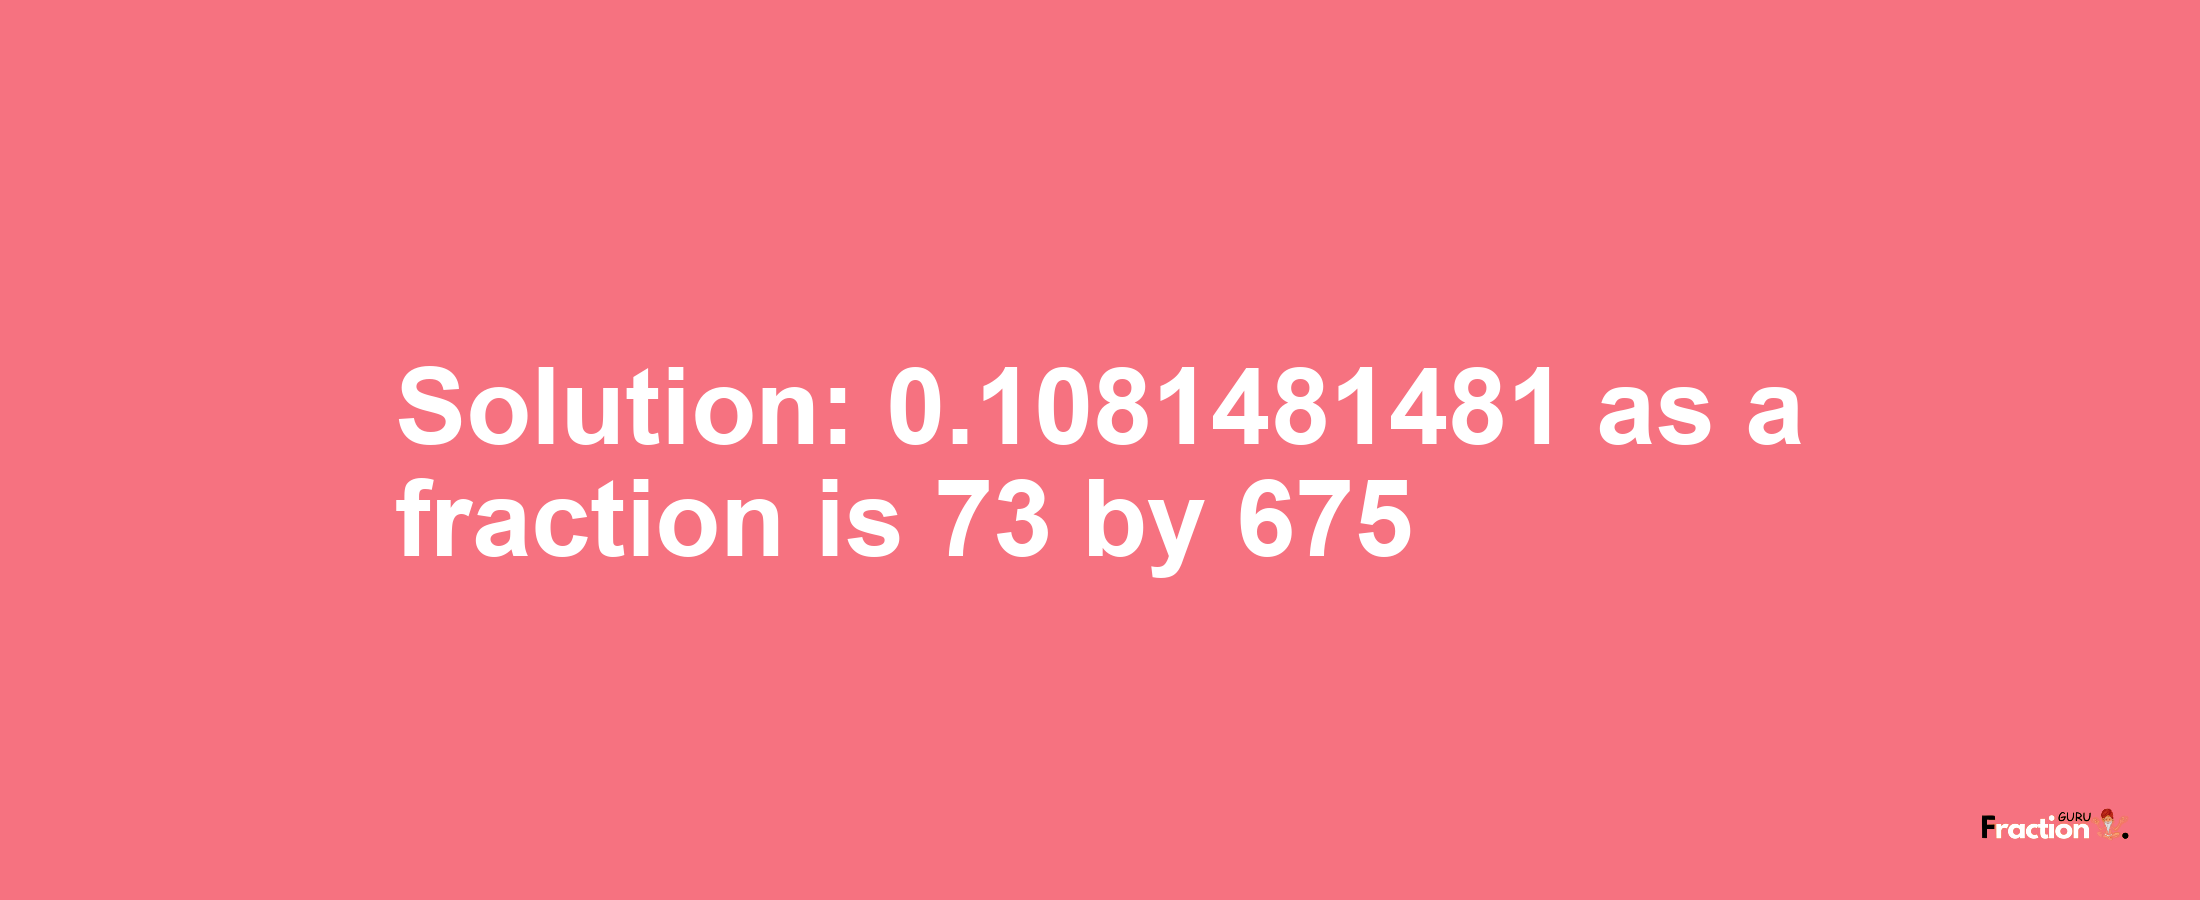 Solution:0.1081481481 as a fraction is 73/675